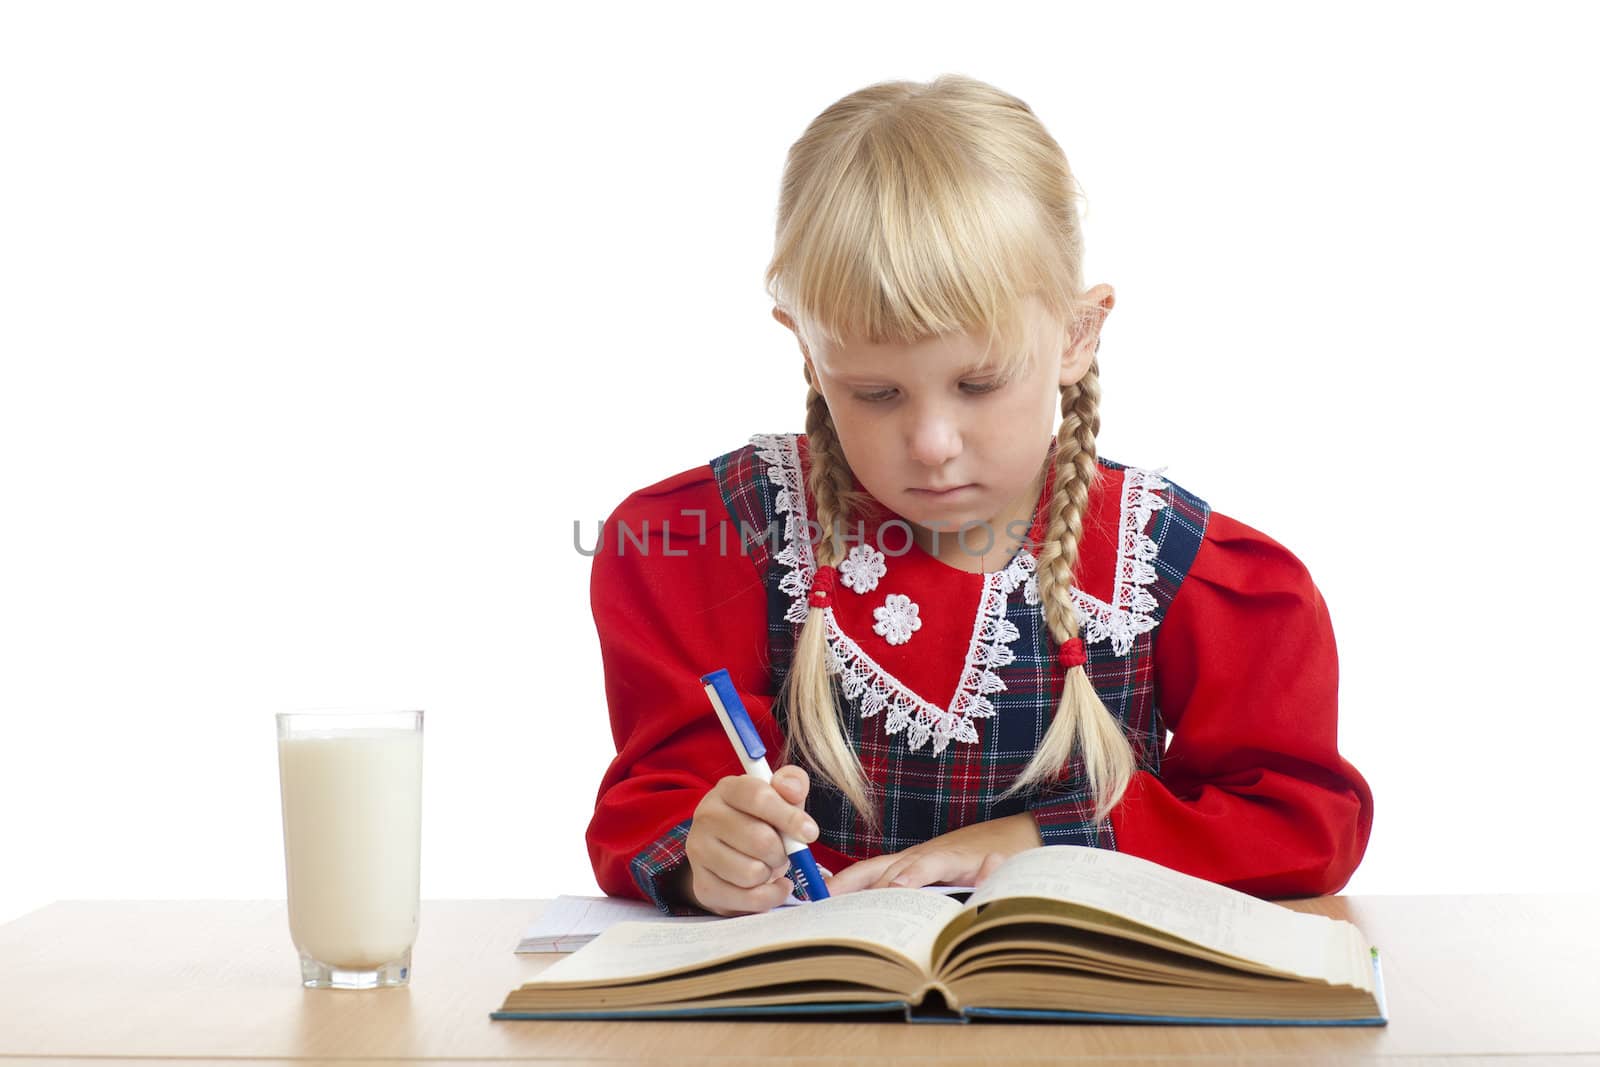 girl writing and a glass of milk by vsurkov